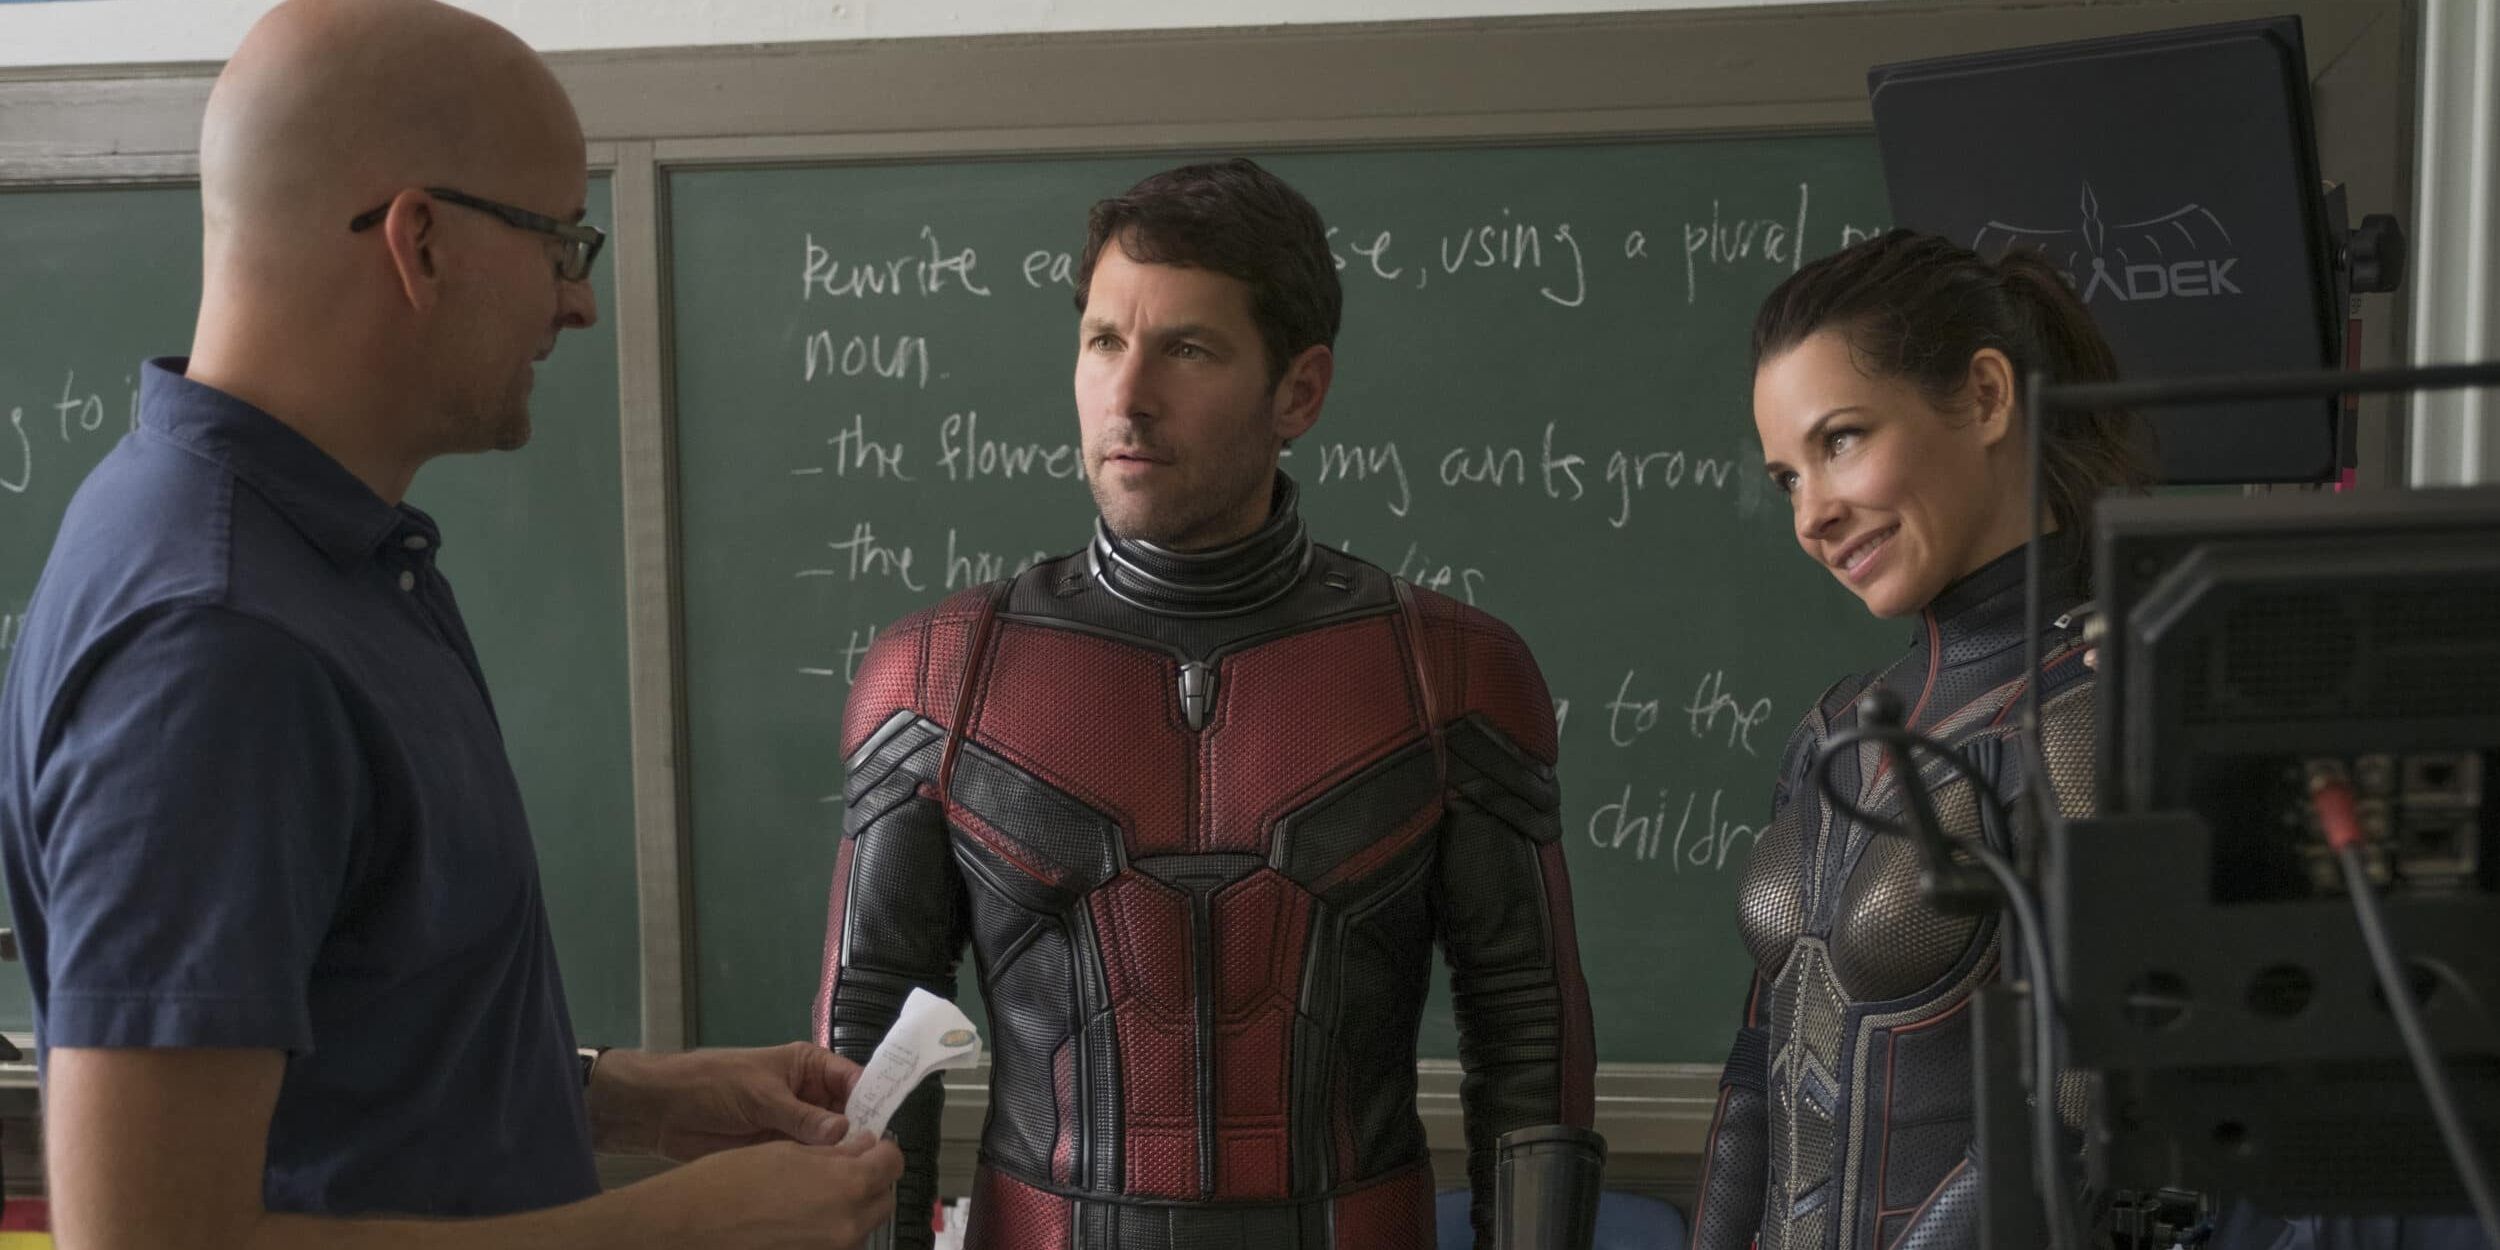 Peyton Reed, Paul Rudd, and Evangeline Lilly on the set of Ant-Man and the Wasp